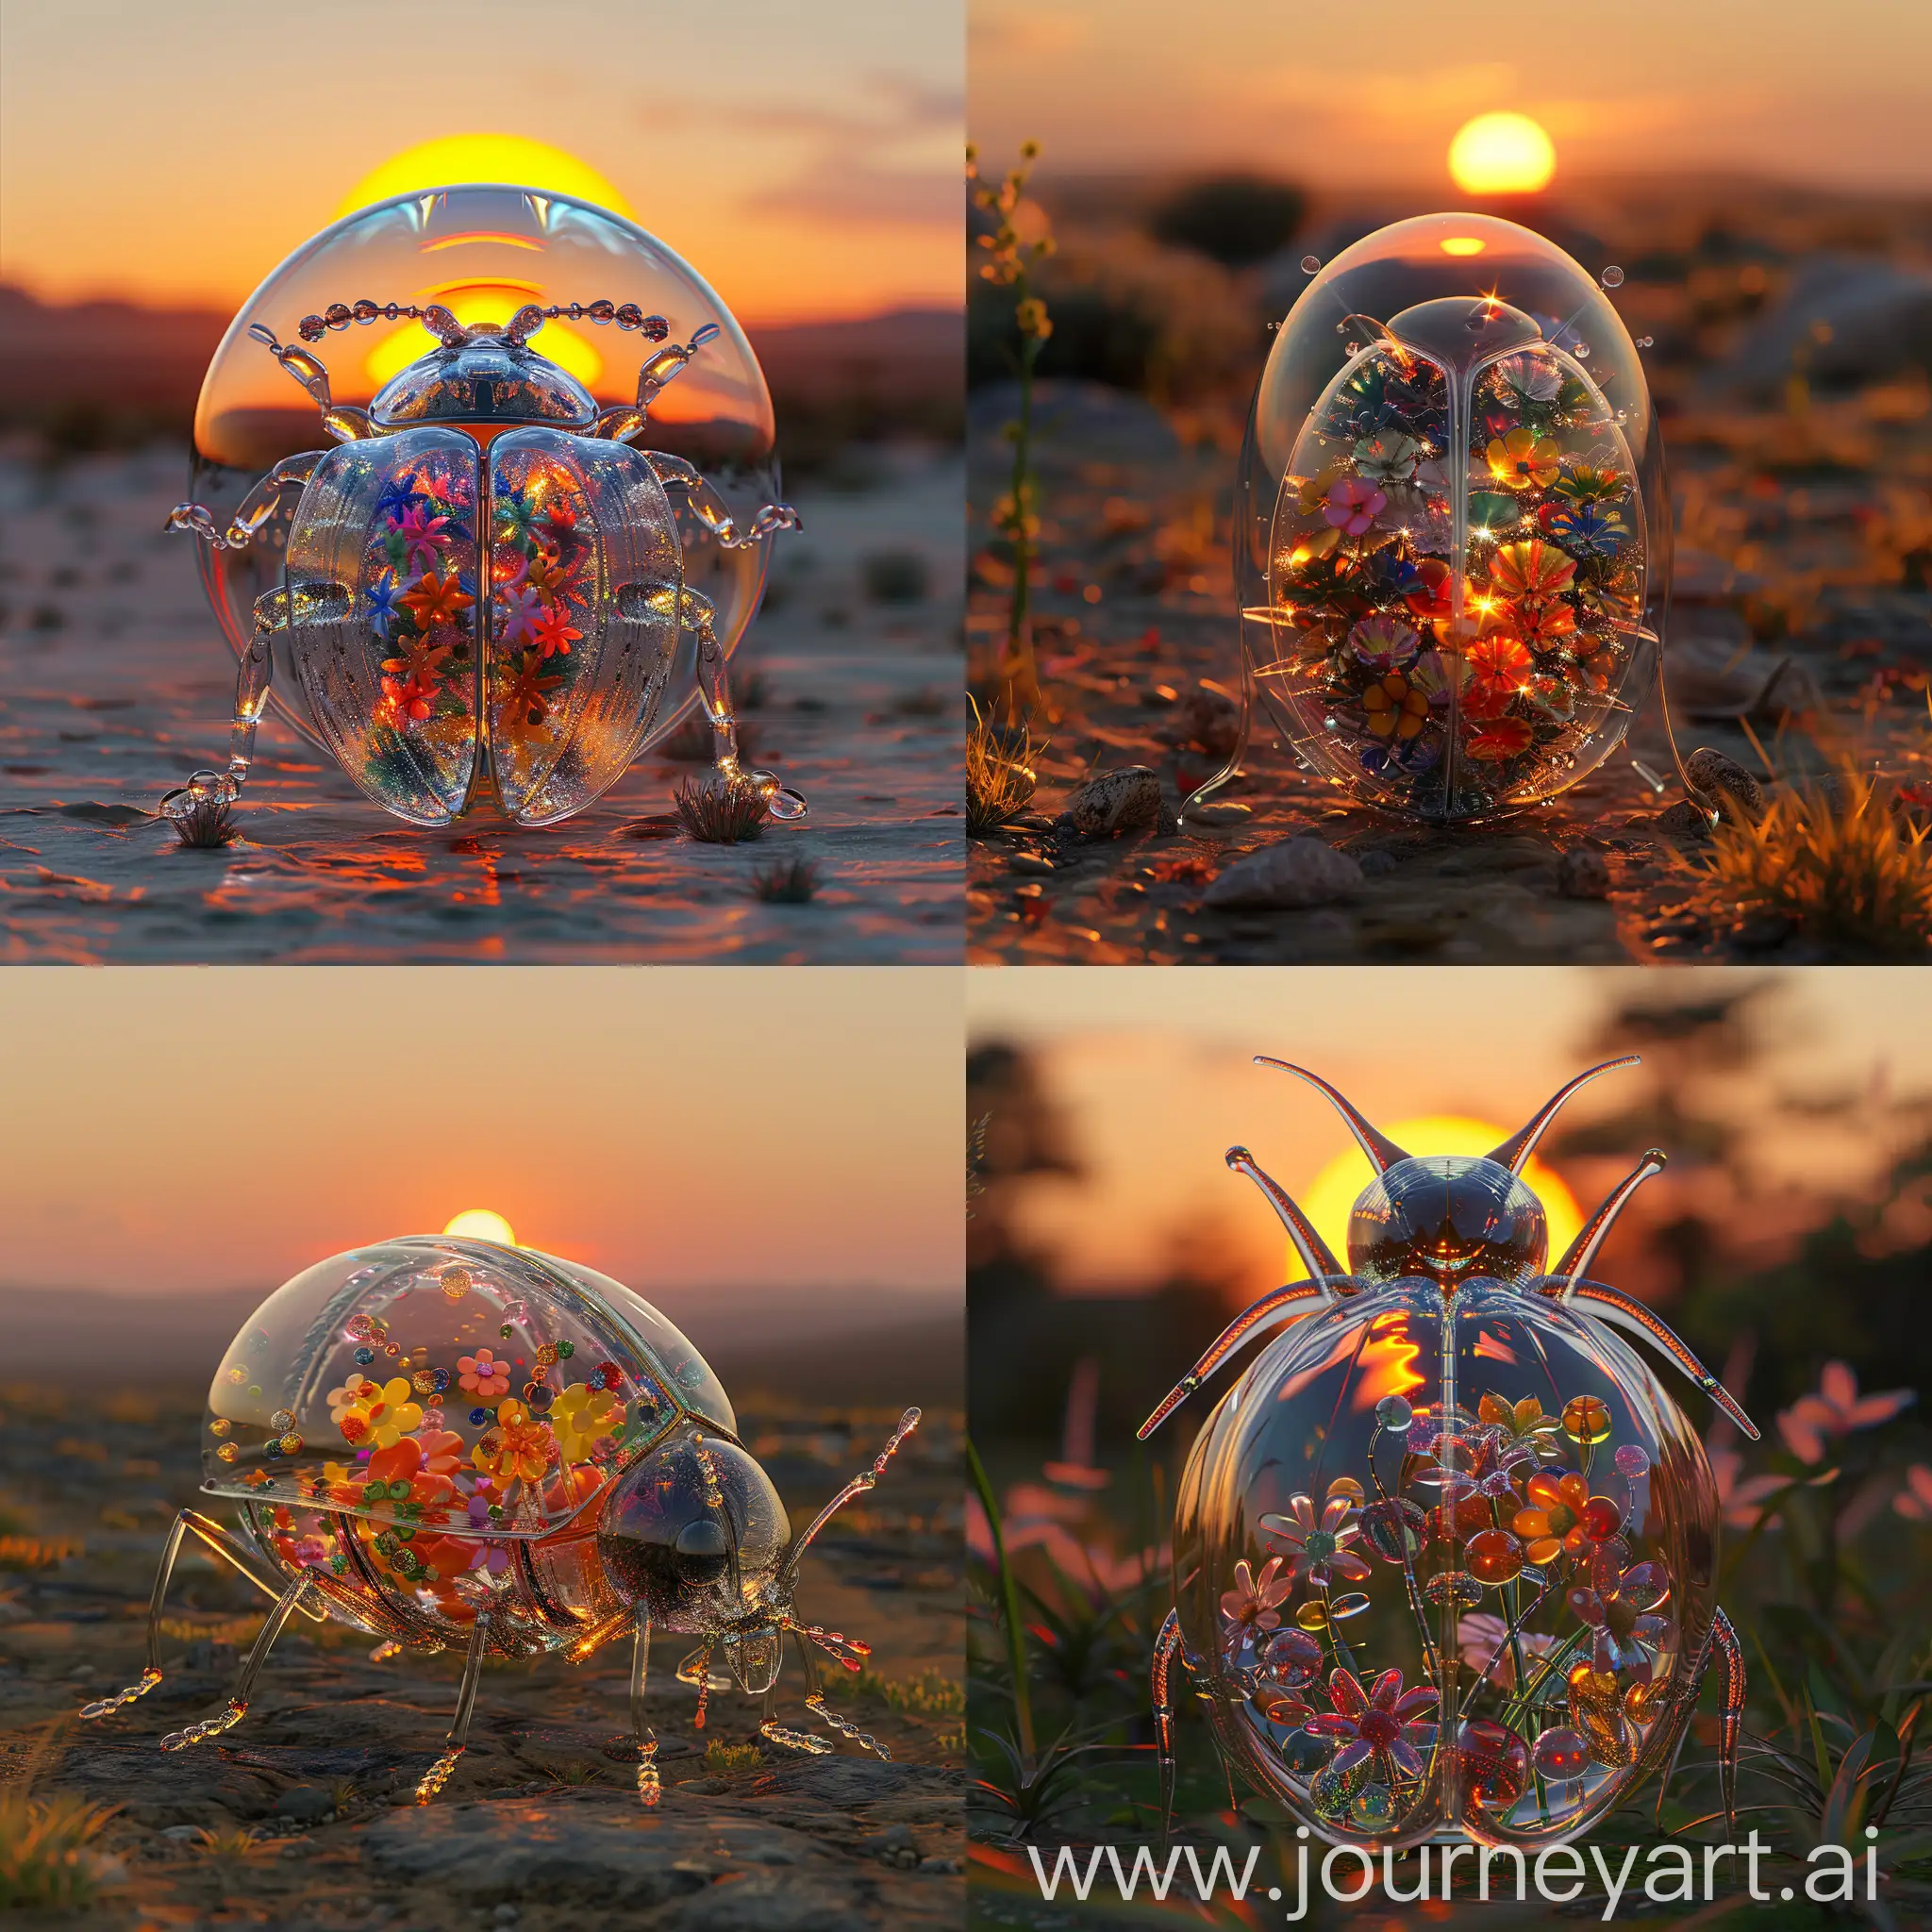 In the center of the scene, a very detailed hollow glass insect beetle made entirely of shiny, thin transparent glass . Inside the beetle, we can see mini multicolored flowers. The orange setting sun illuminates the beetle. Scene expressing tranquility and an Asian Zen atmosphere. hyperrealistic, 3D,  8K HDR, high resolution.